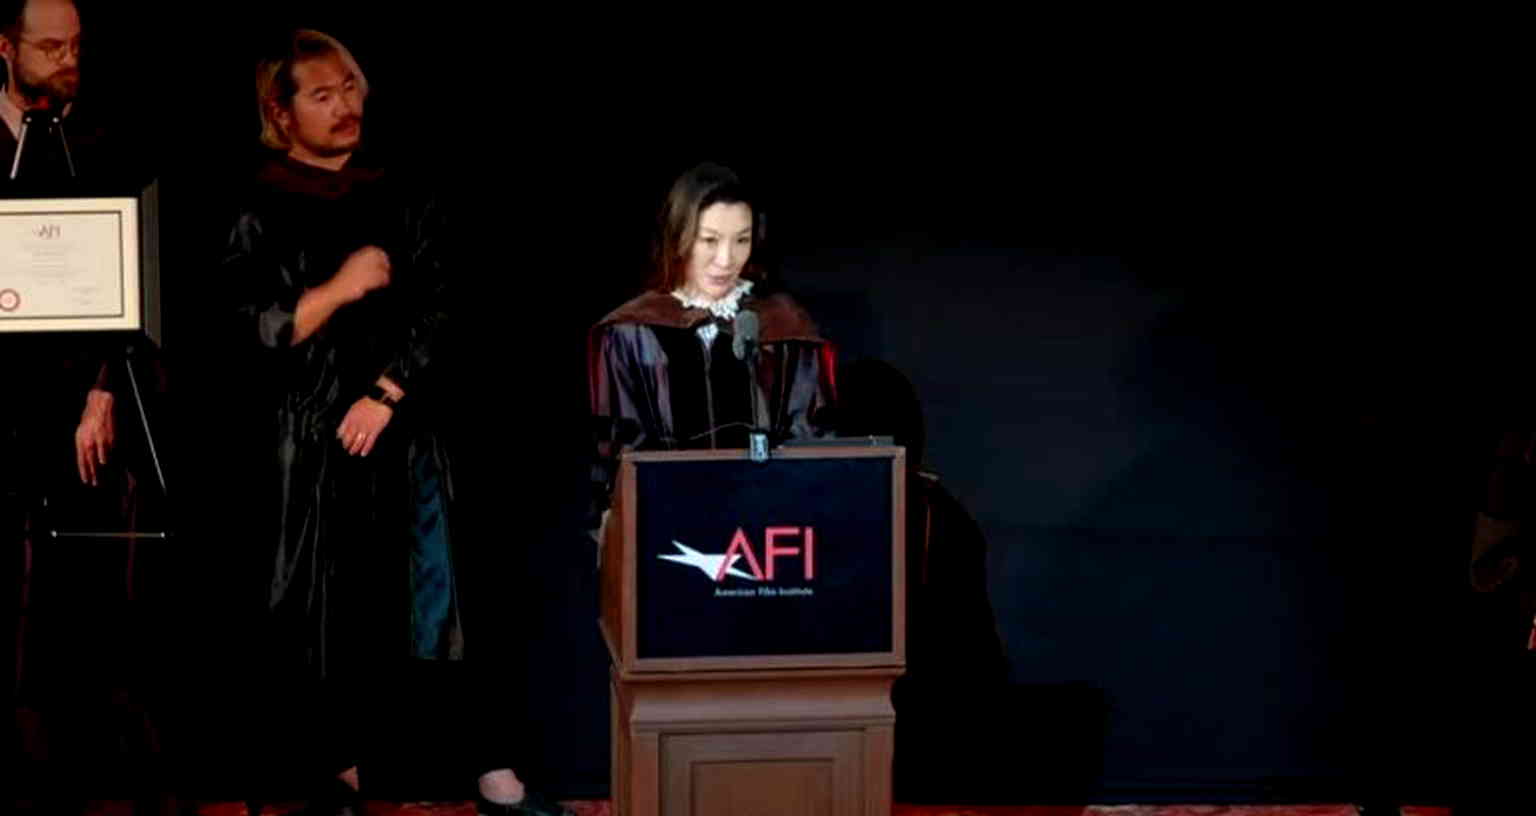 Michelle Yeoh receives honorary doctorate from AFI: ‘After I learned how to fall, I could learn how to fly’